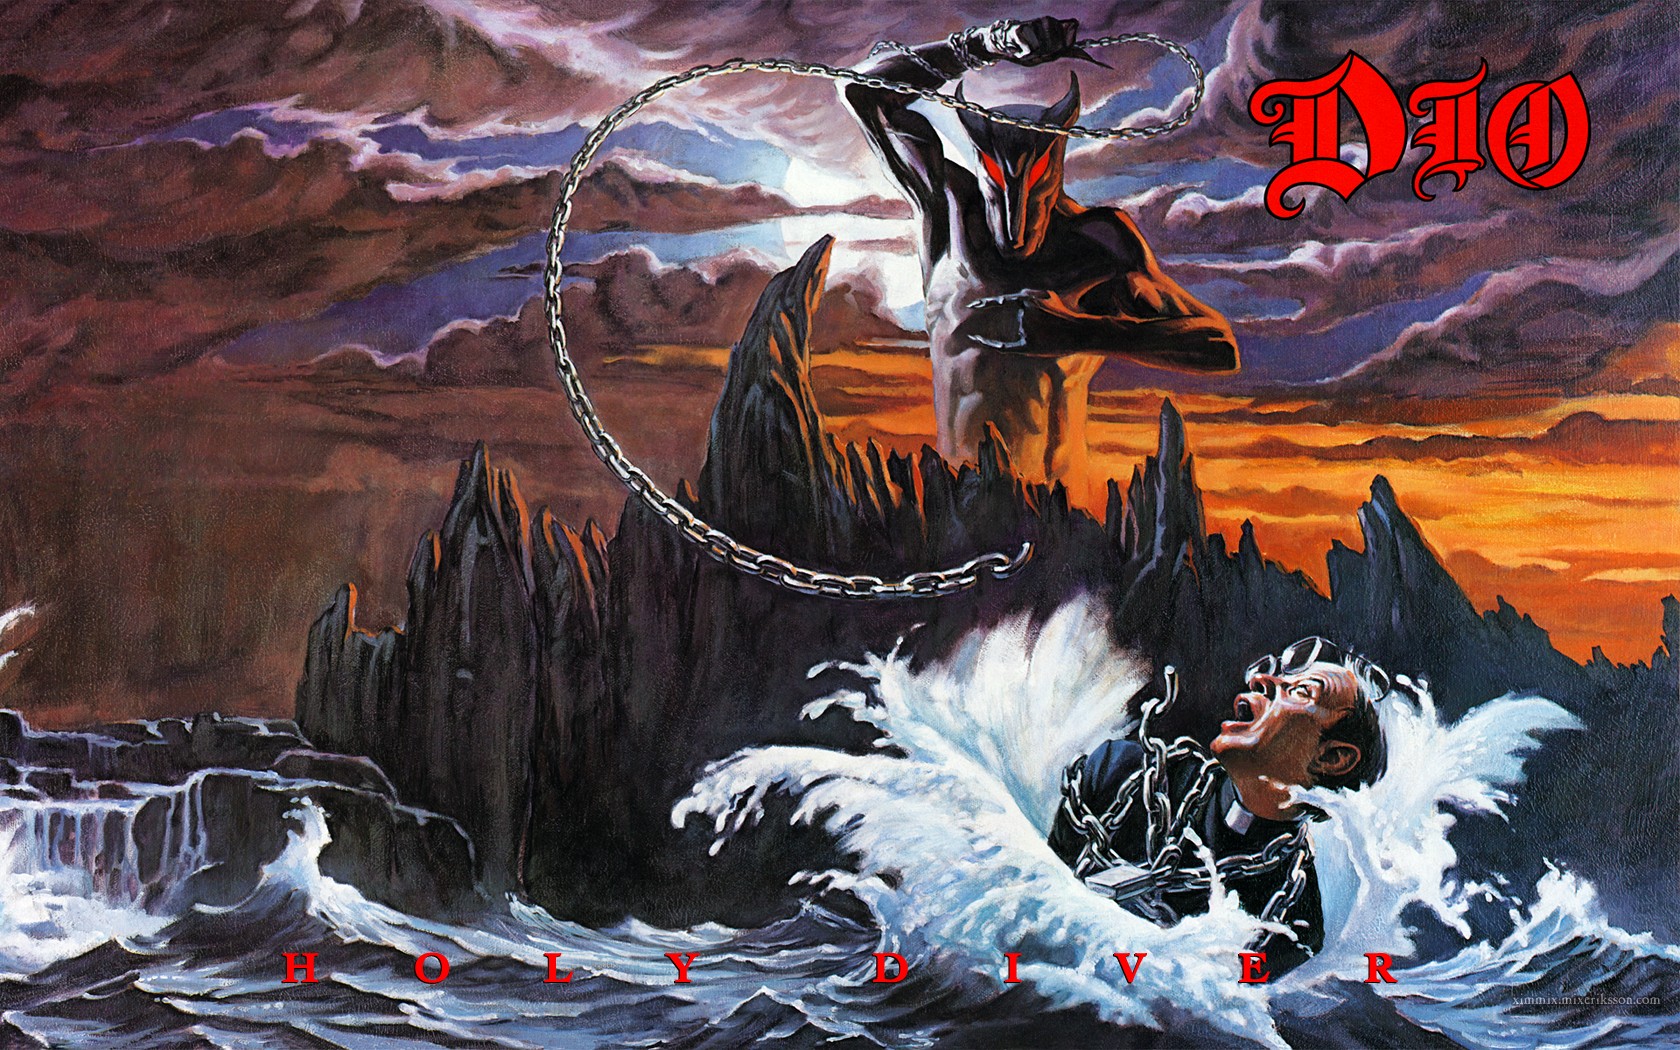 General 1680x1050 heavy metal album covers cover art traditional heavy metal Dio fantasy art drowning artwork traditional art metal horns hand gesture chains metal music rock music horns in water horror creature backlighting waves men with glasses men open mouth music